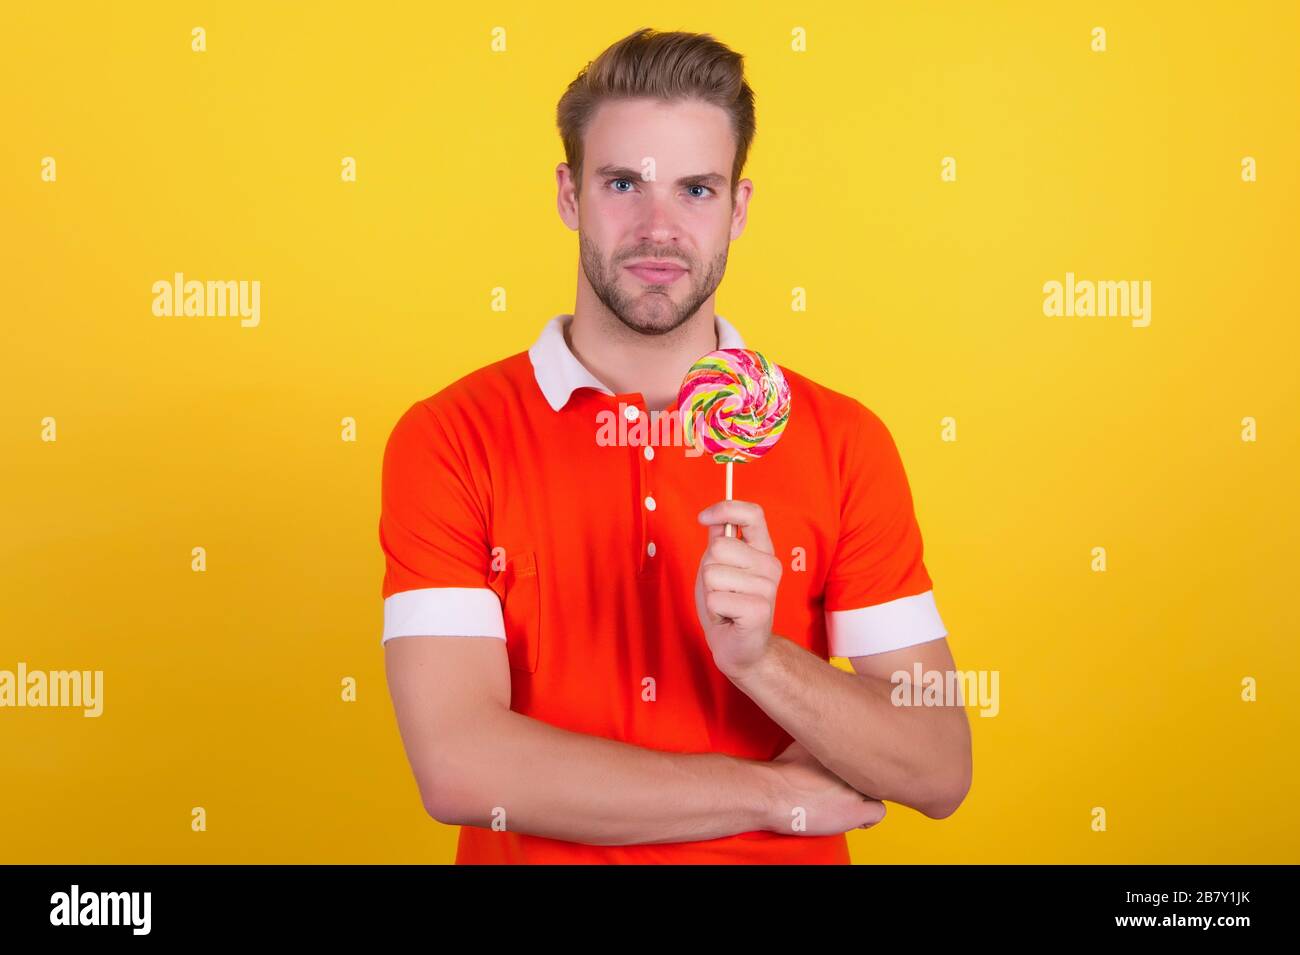 Taste the rainbow. Man candy yellow background. Handsome guy hold candy on stick. Candy shop. Lollipop or sucker. Sugary treat. Candy factory and confectionary. Stock Photo